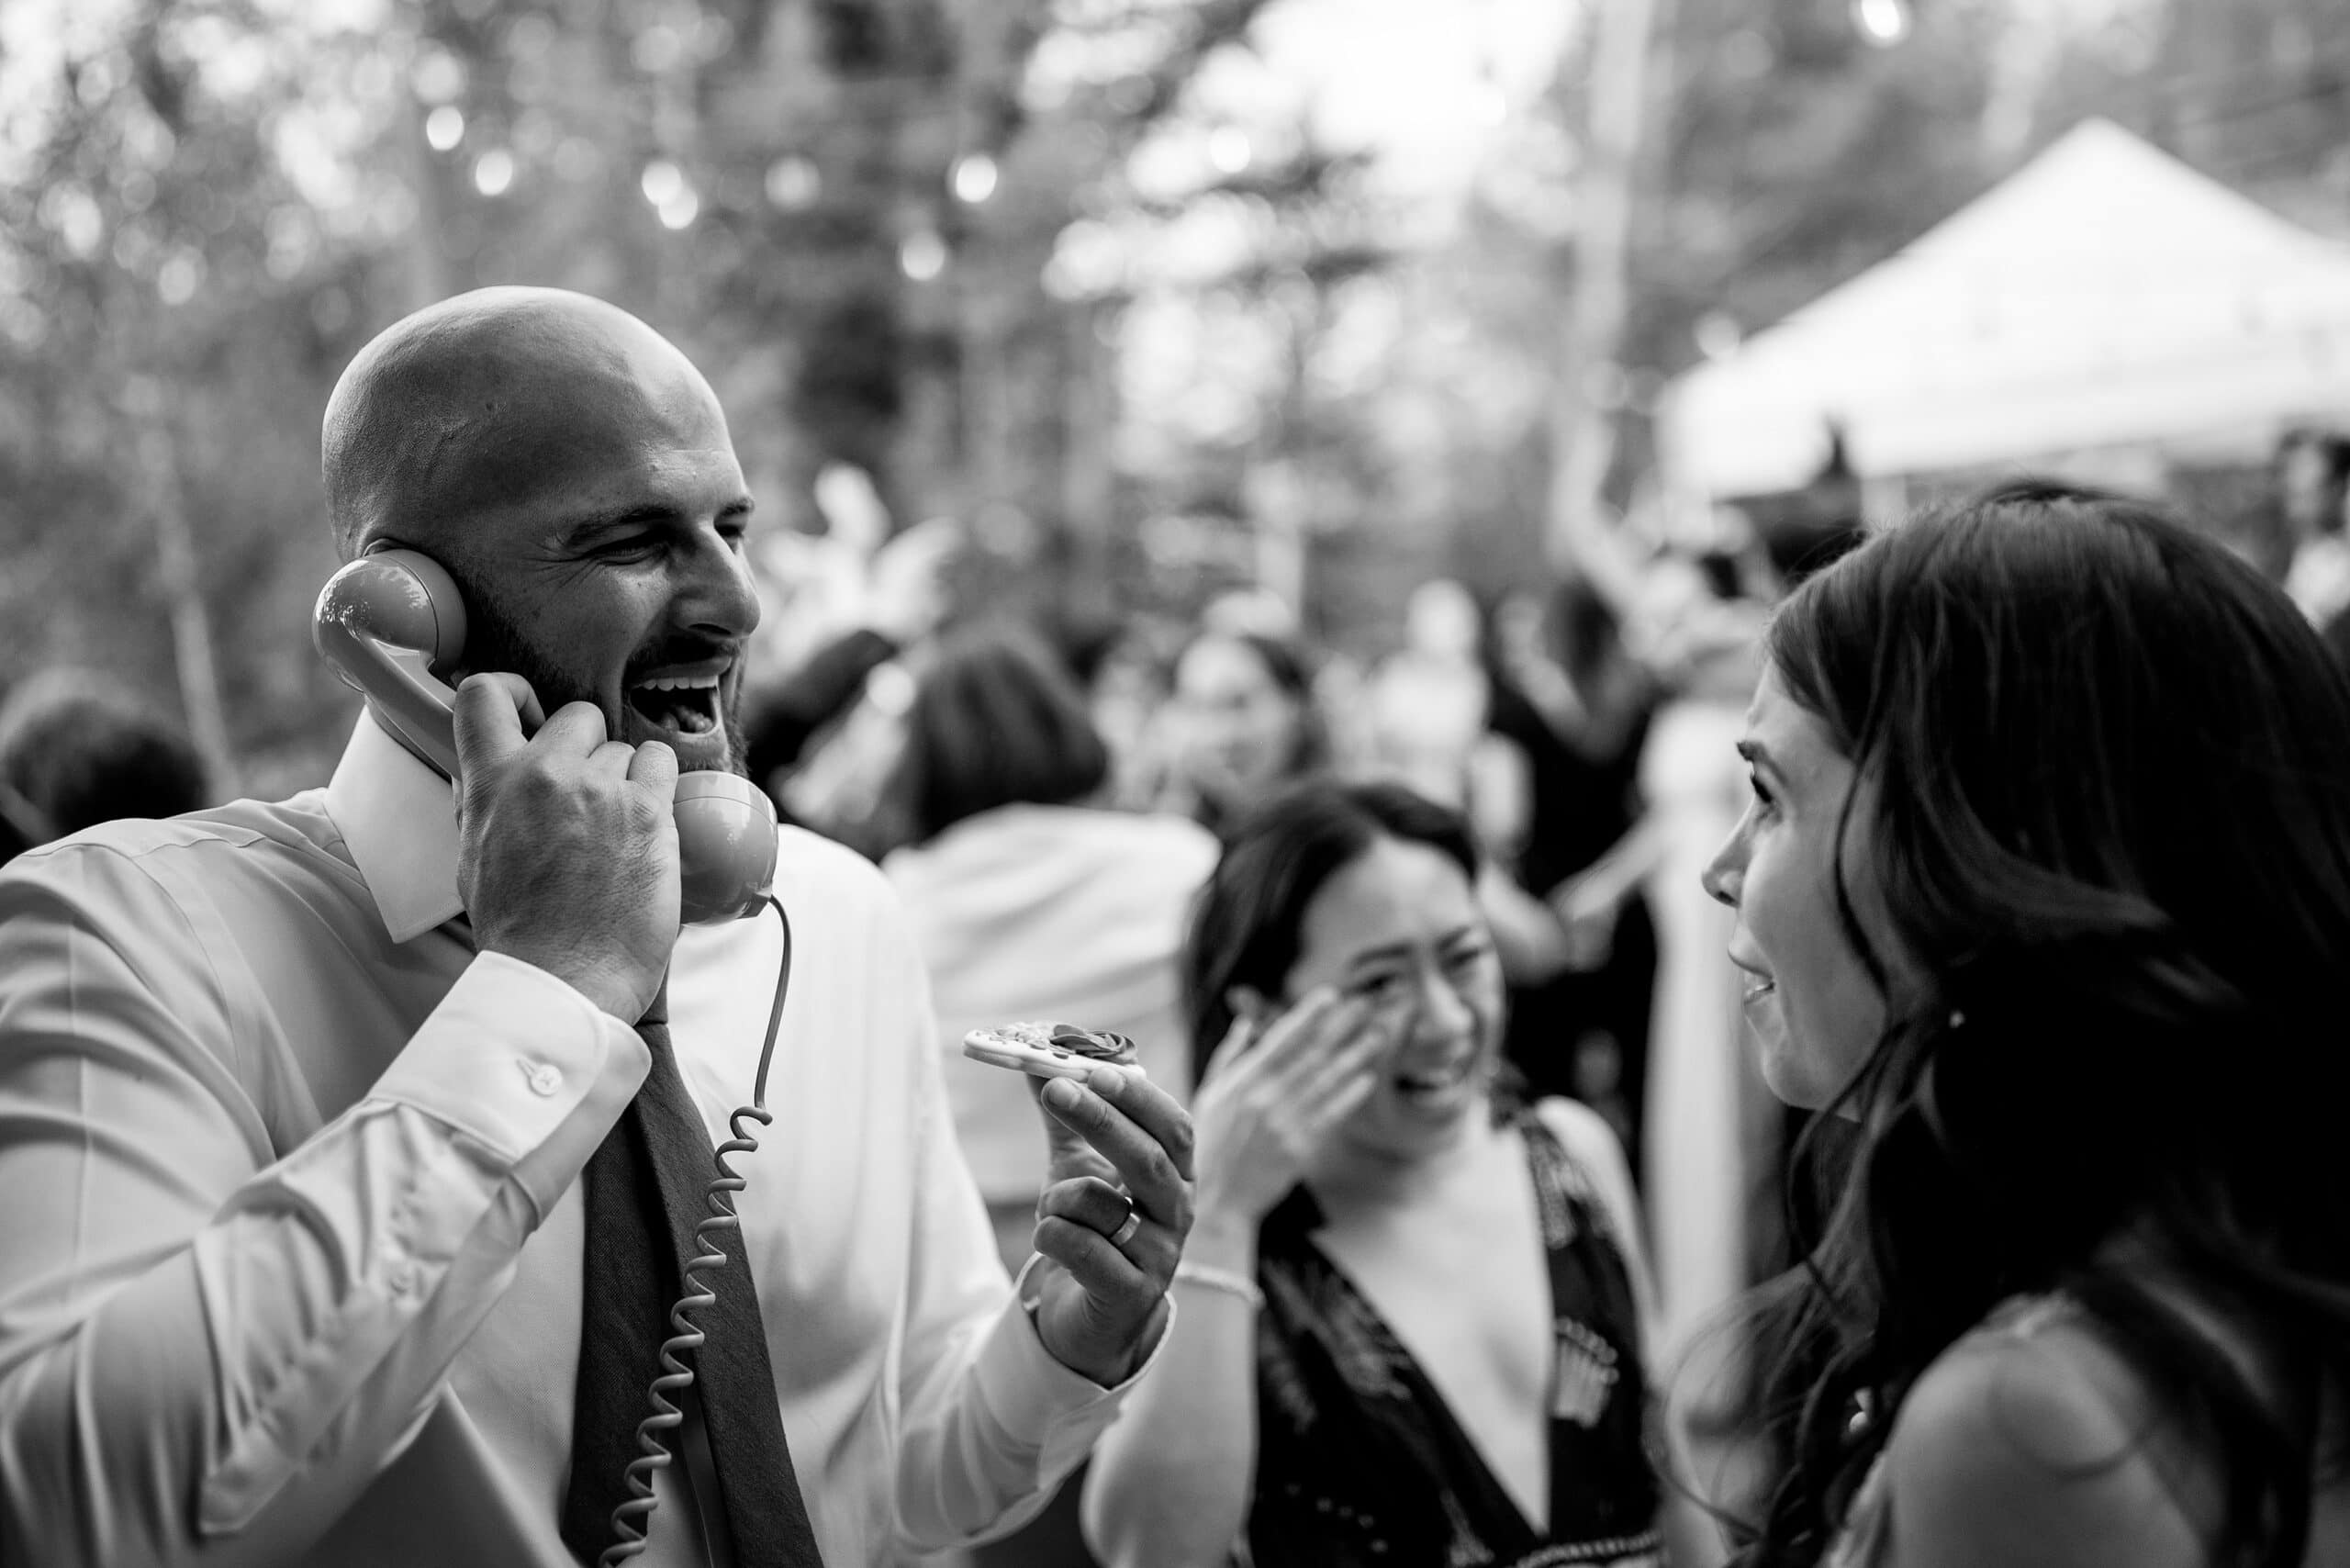 The groom records a message for the bride during their wedding reception